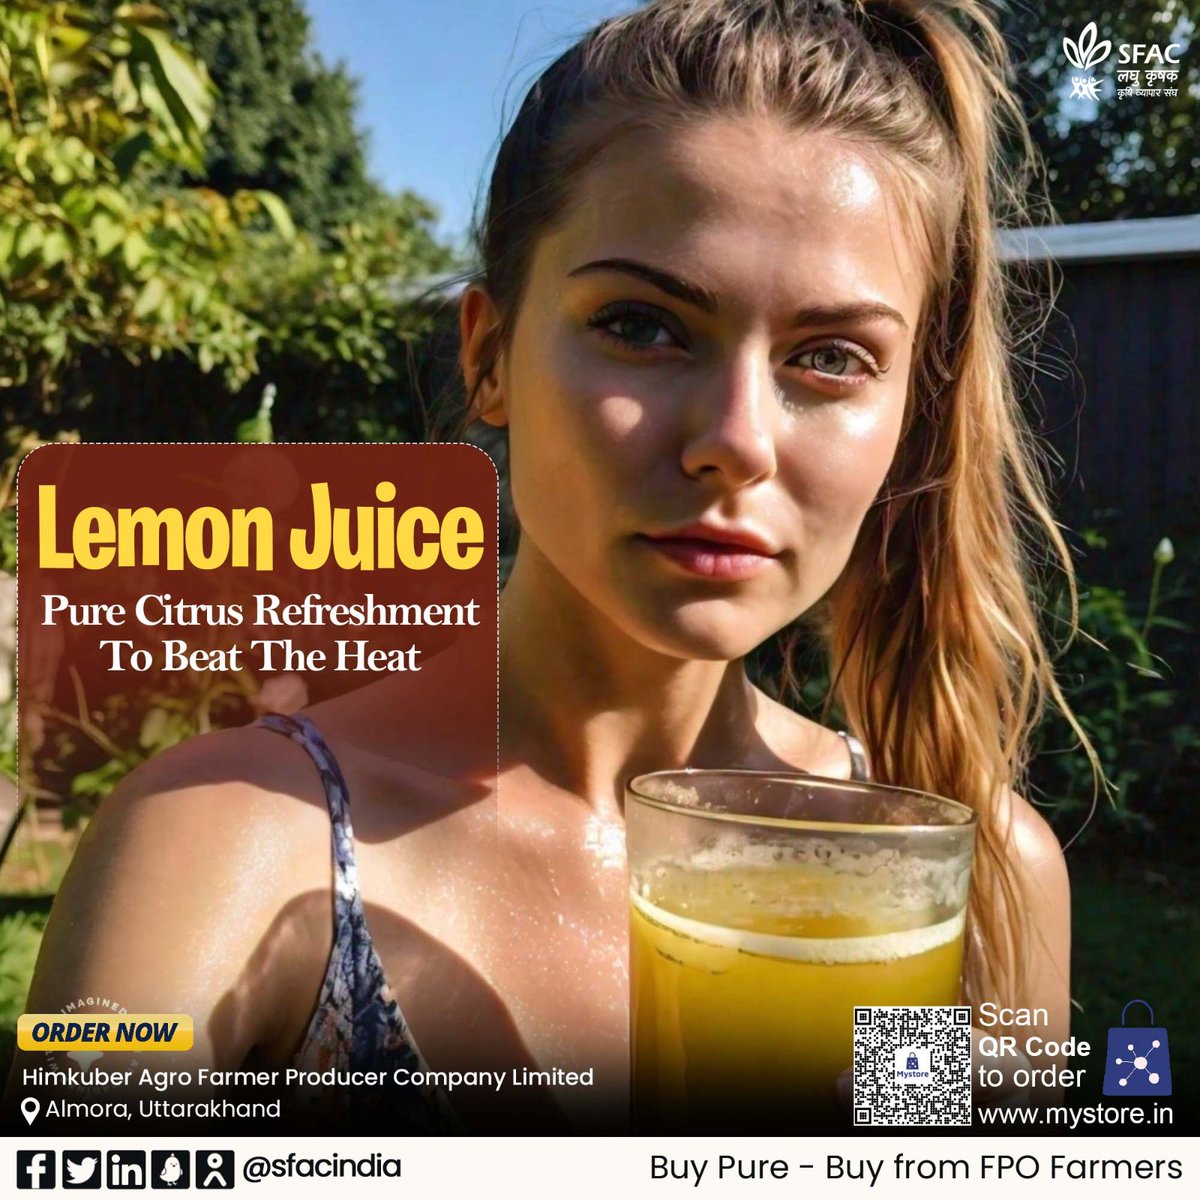 Naturally refreshing pure lemon juice to stay cool & energetic.

No added sugar or colour, only natural goodness & flavour.

Buy straight from FPO farmers👇

mystore.in/en/product/lem…

🍹

#VocalForLocal #healthychoices #healthyeating #healthyhabits #tastyrecipes #tastybreakfast